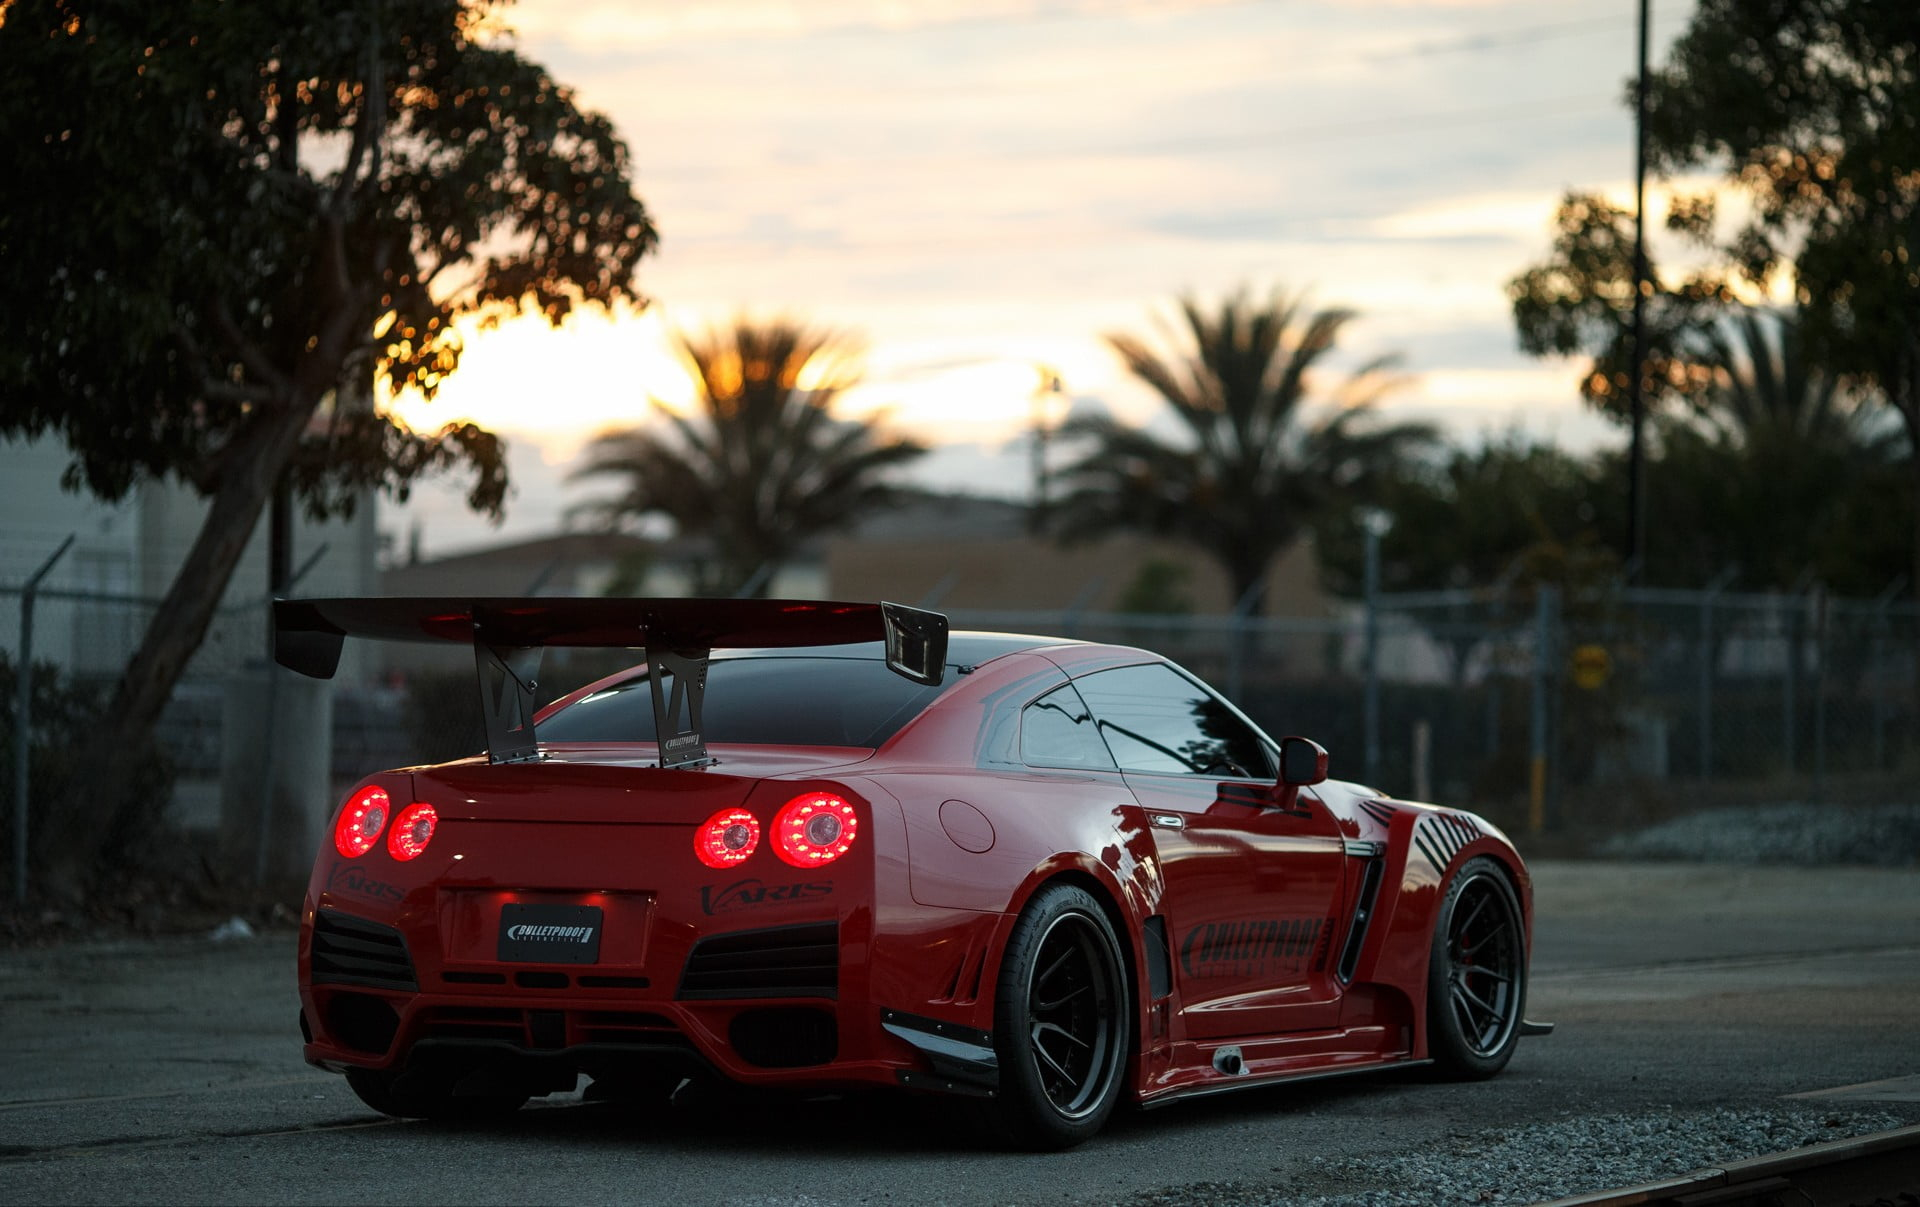 Red Sports Car Wallpapers